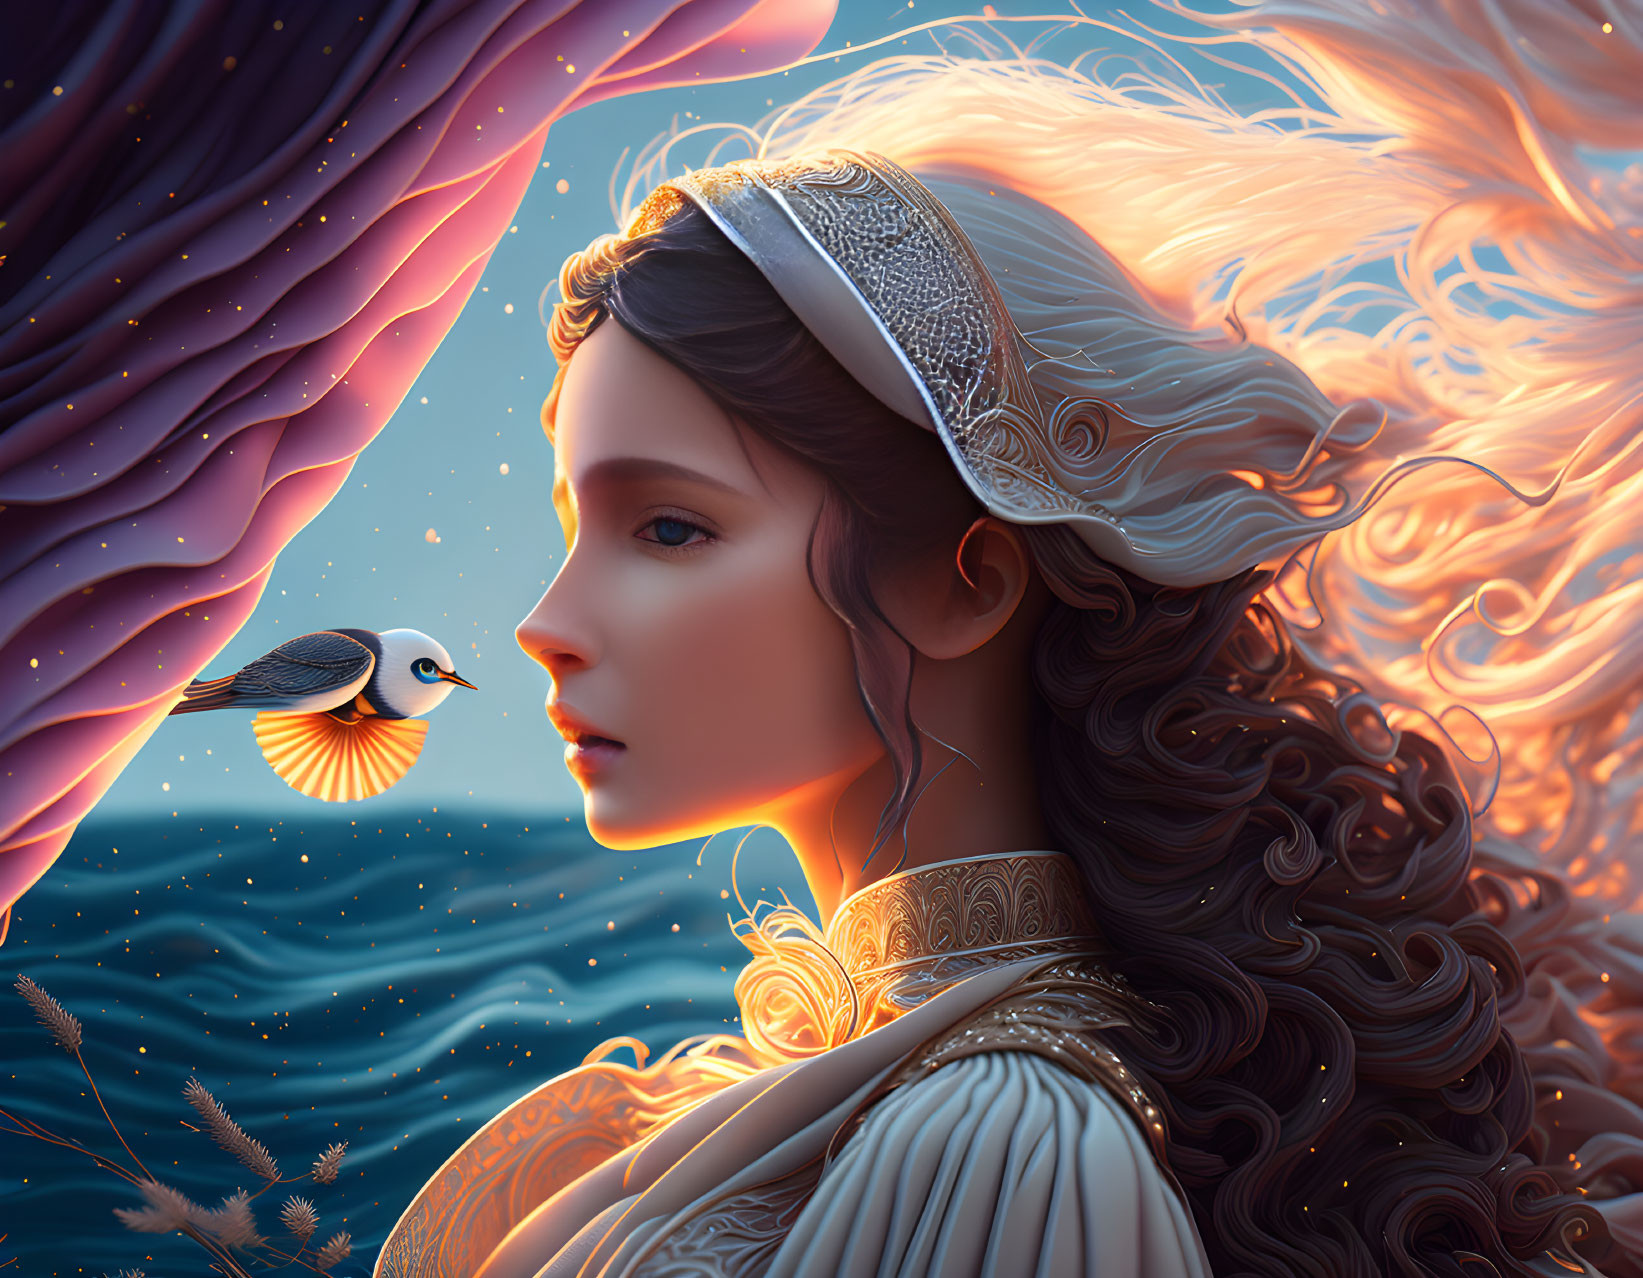 Curly-haired woman with diadem gazes beside bird in starry twilight scene